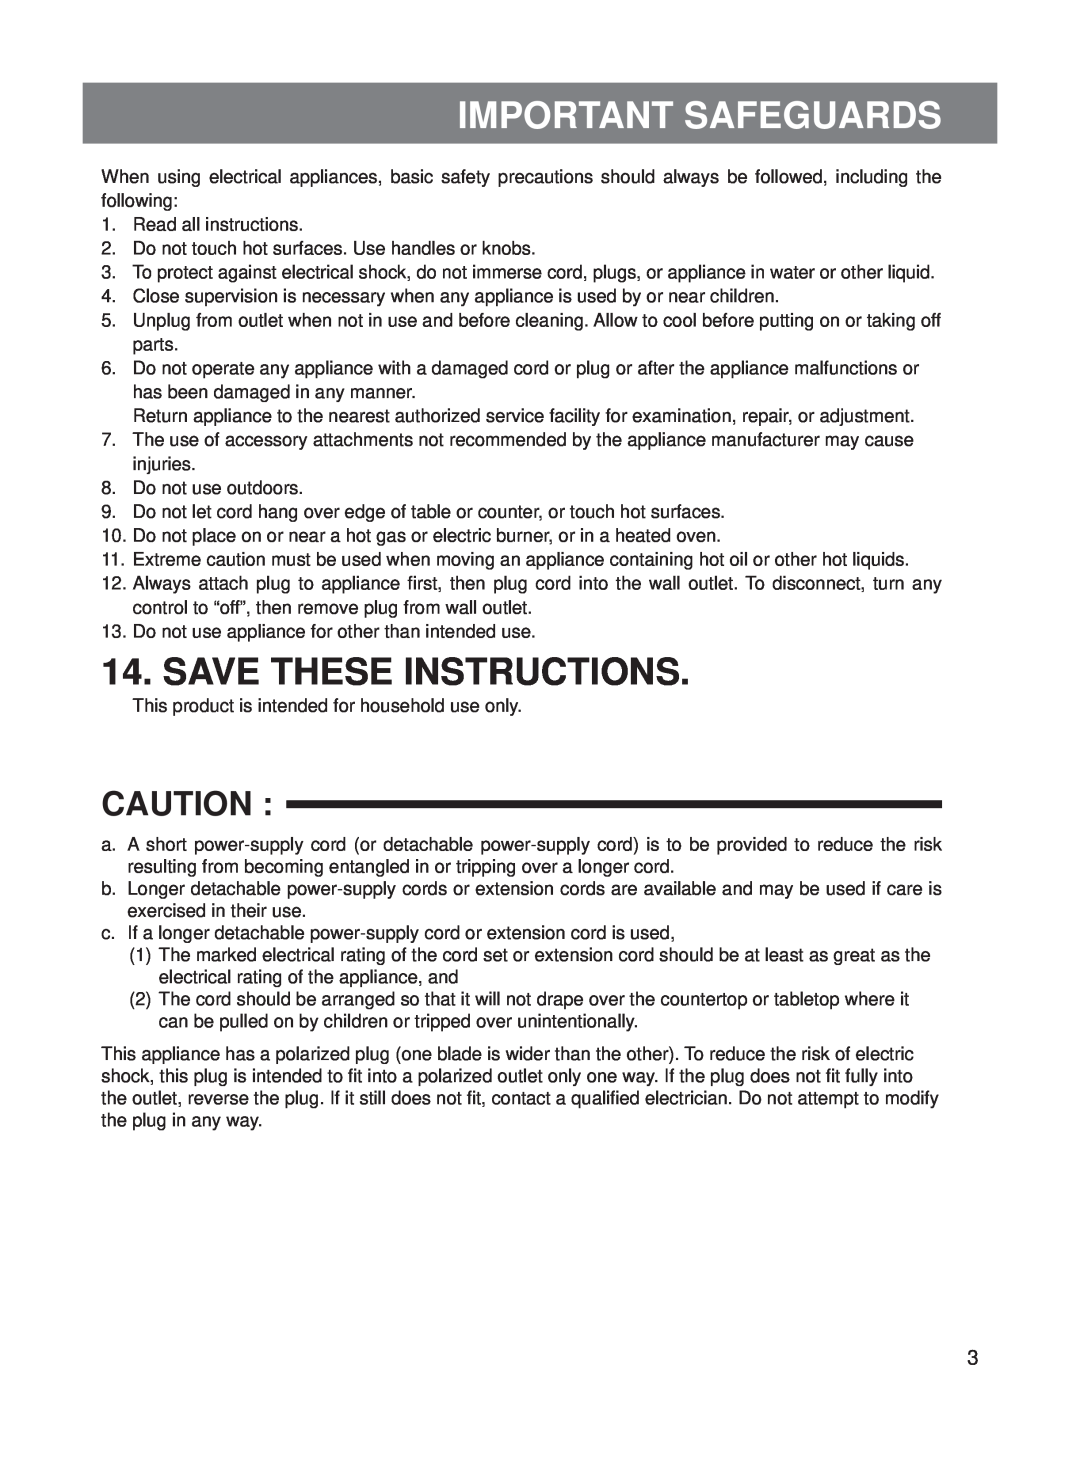 Panasonic SRMS183, SRMS103 operating instructions Important Safeguards, Save These Instructions 